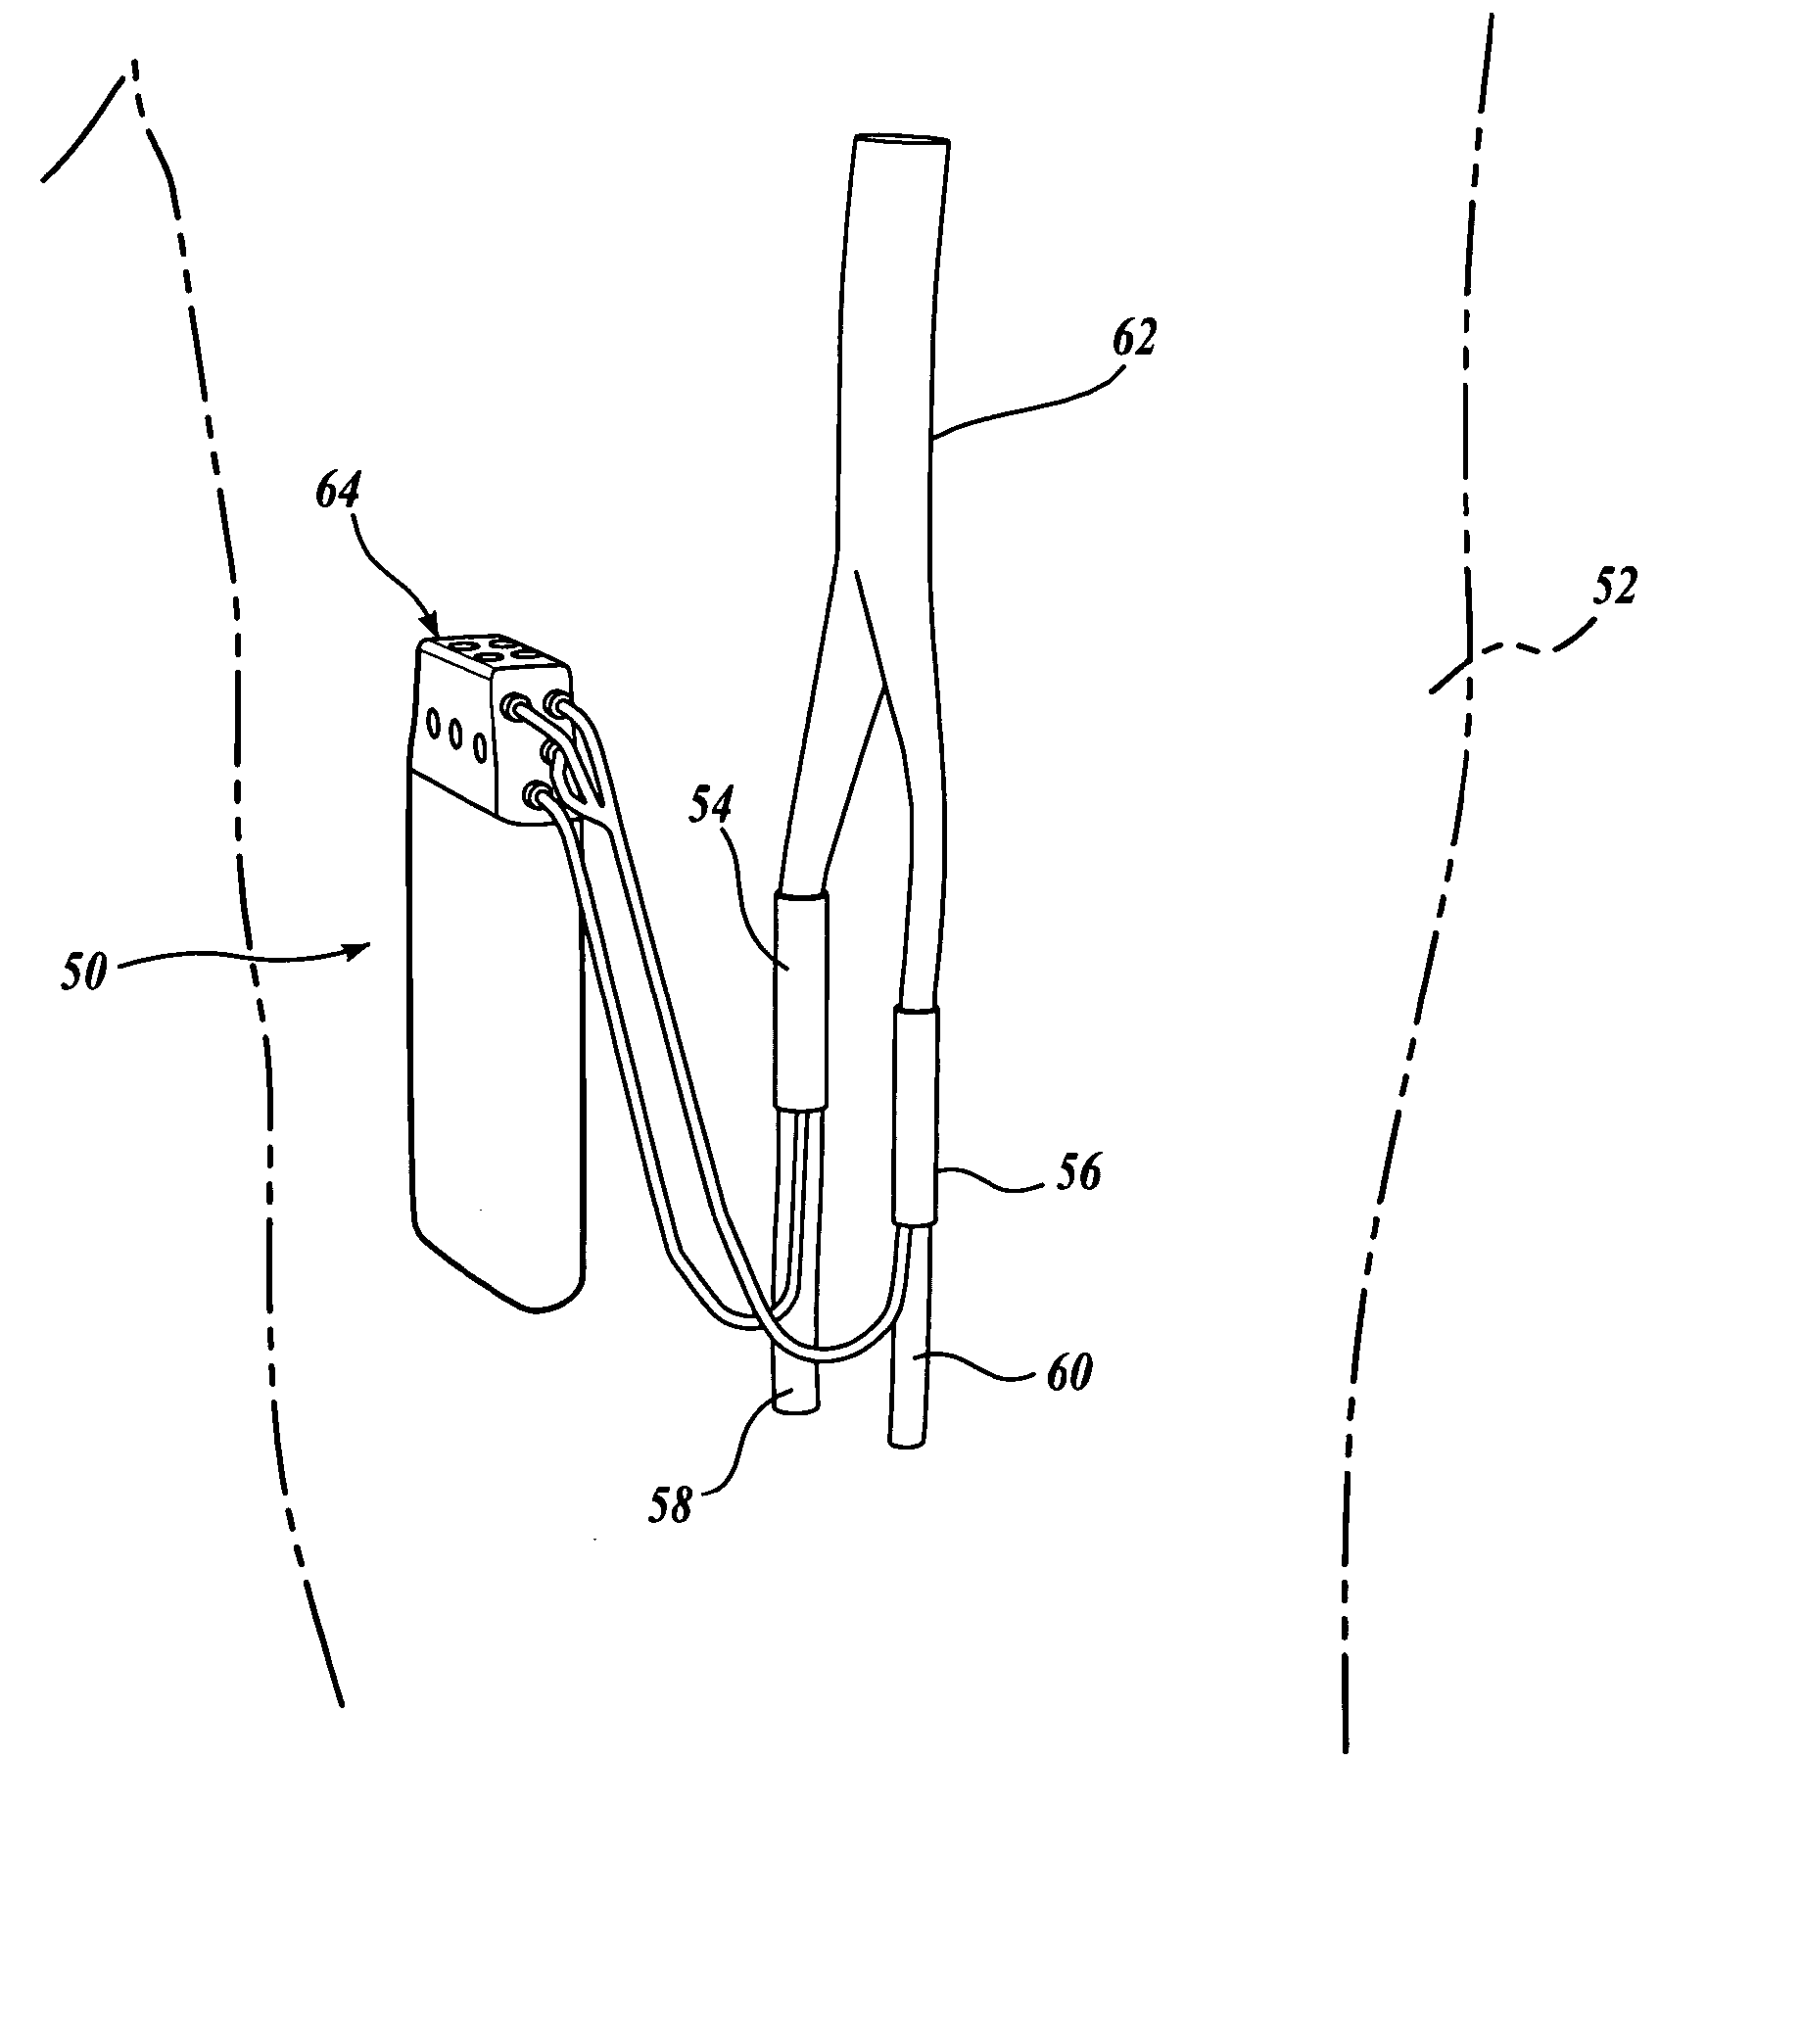 Fully implantable nerve signal sensing and stimulation device and method for treating foot drop and other neurological disorders